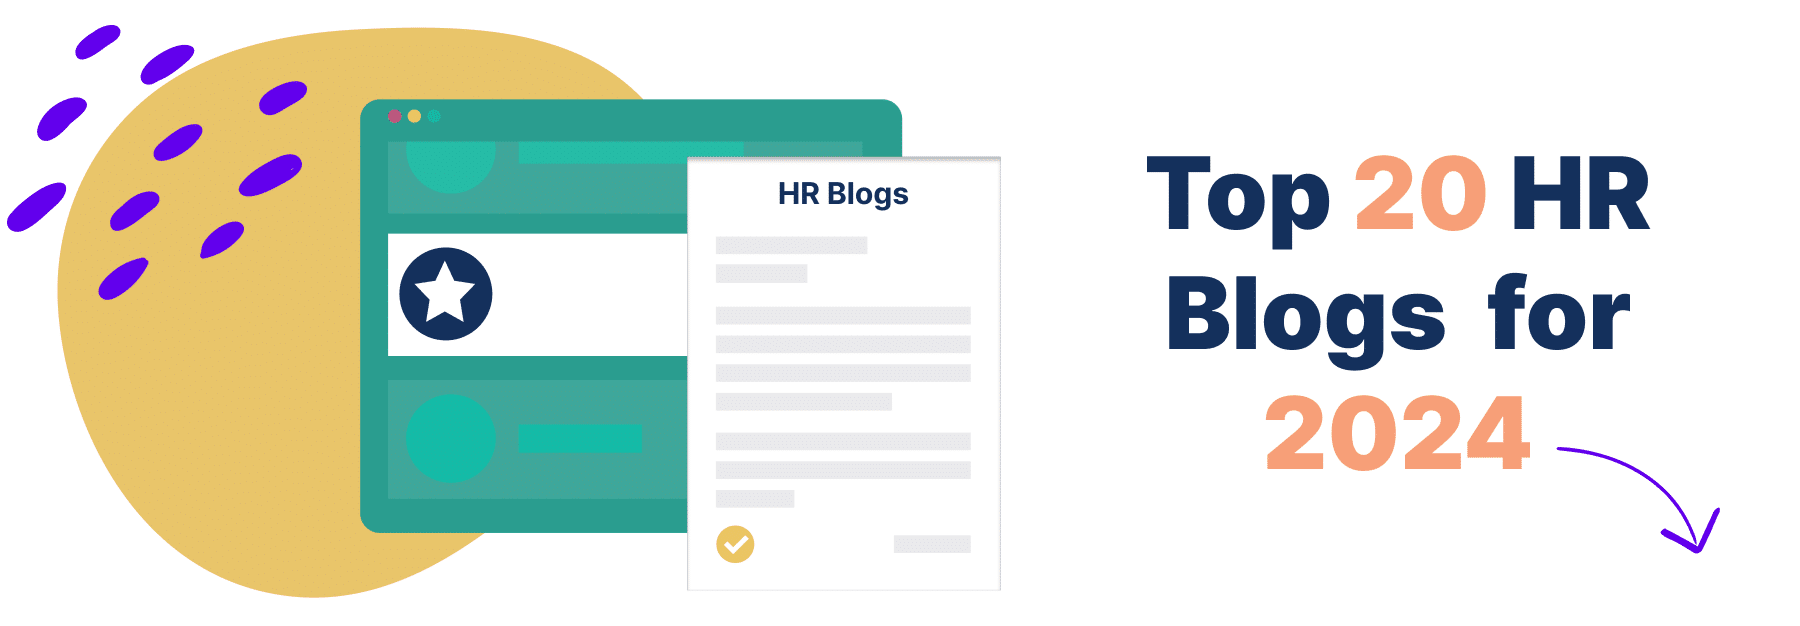 Top Hr Blogs For 2024